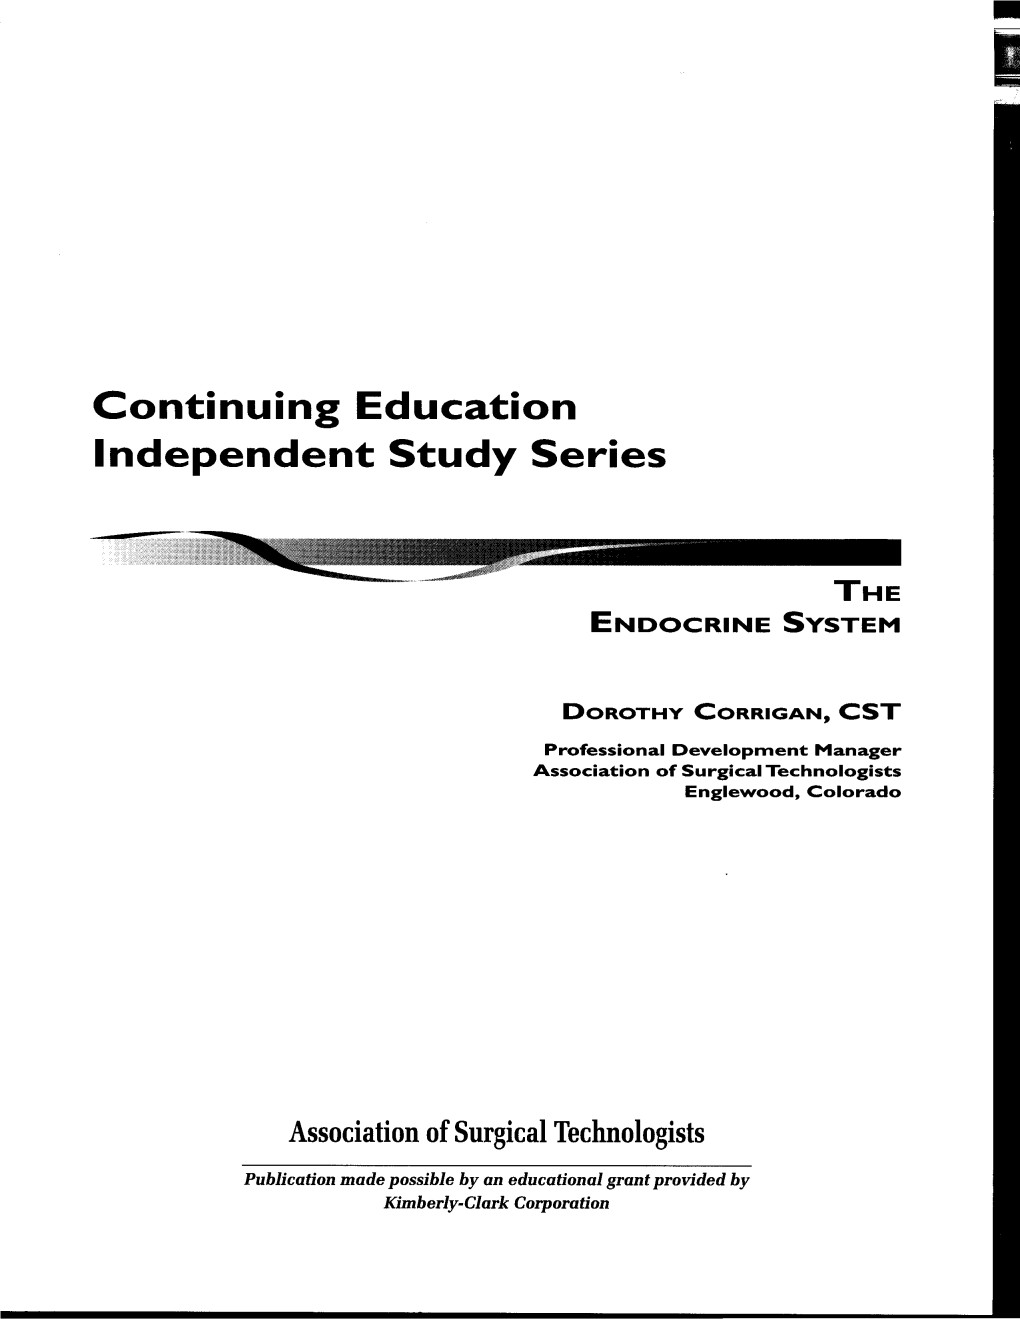 Continuing Education Independent Study Series